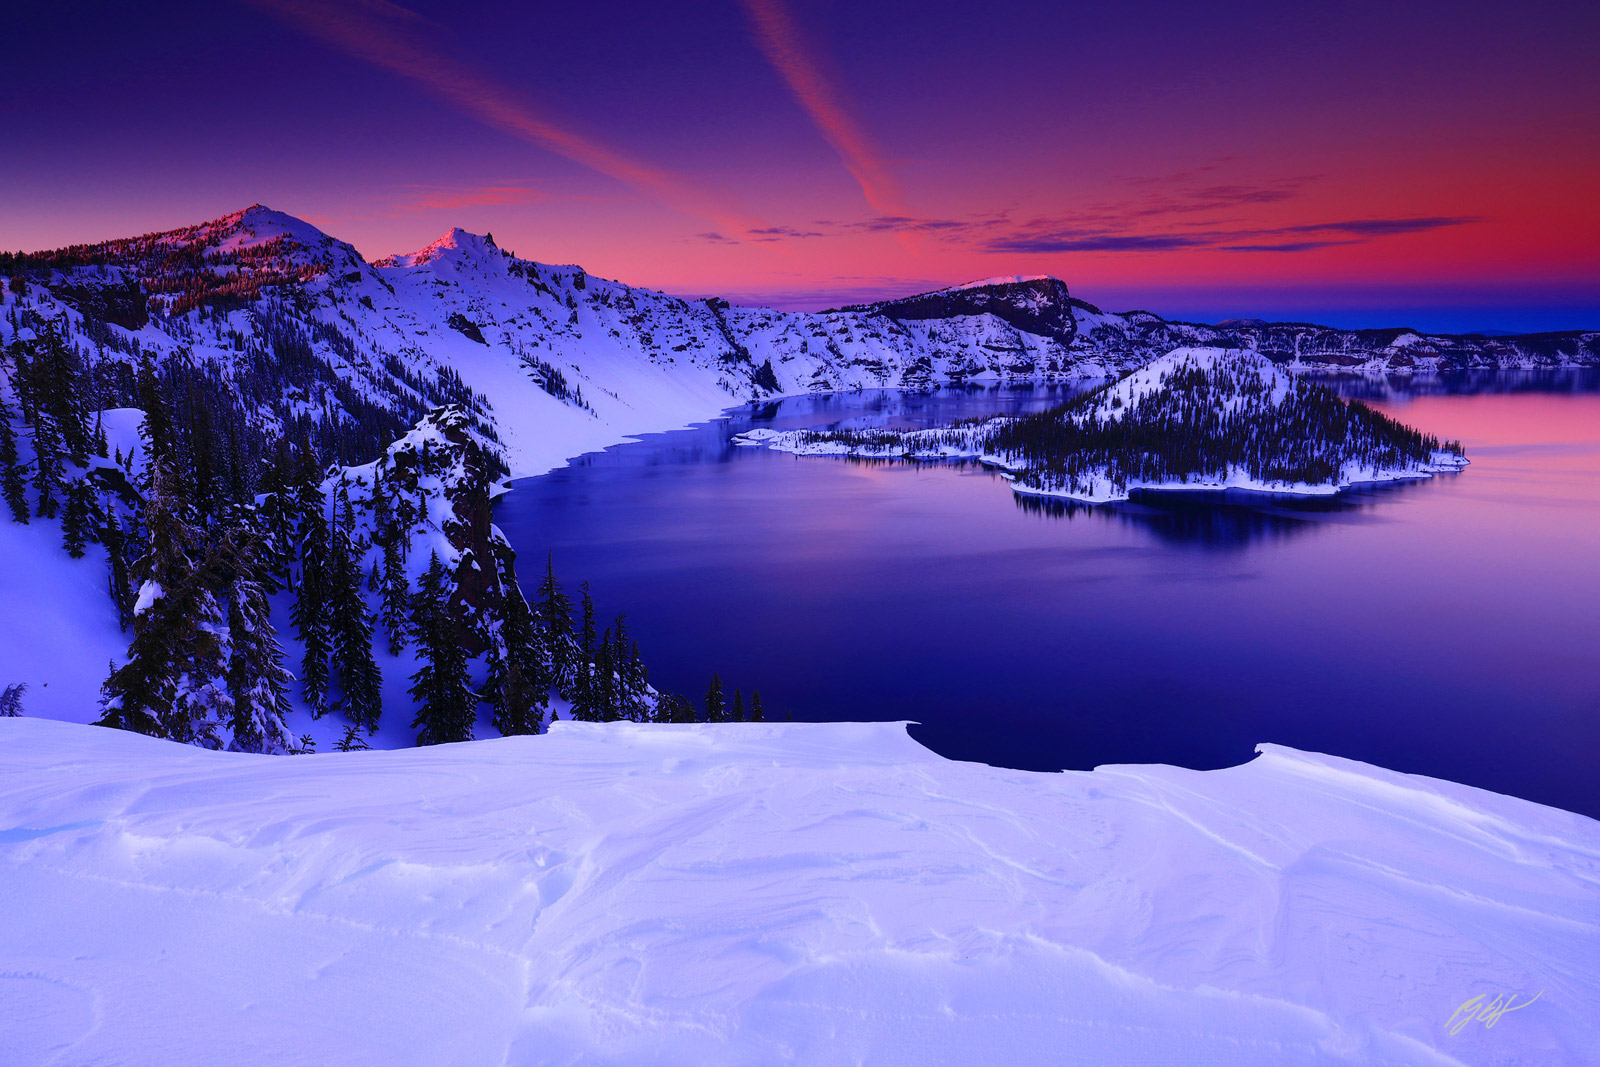 Winter Sunset over Crater Lake and Wizard Island from Crater Lake National Park in Oregon